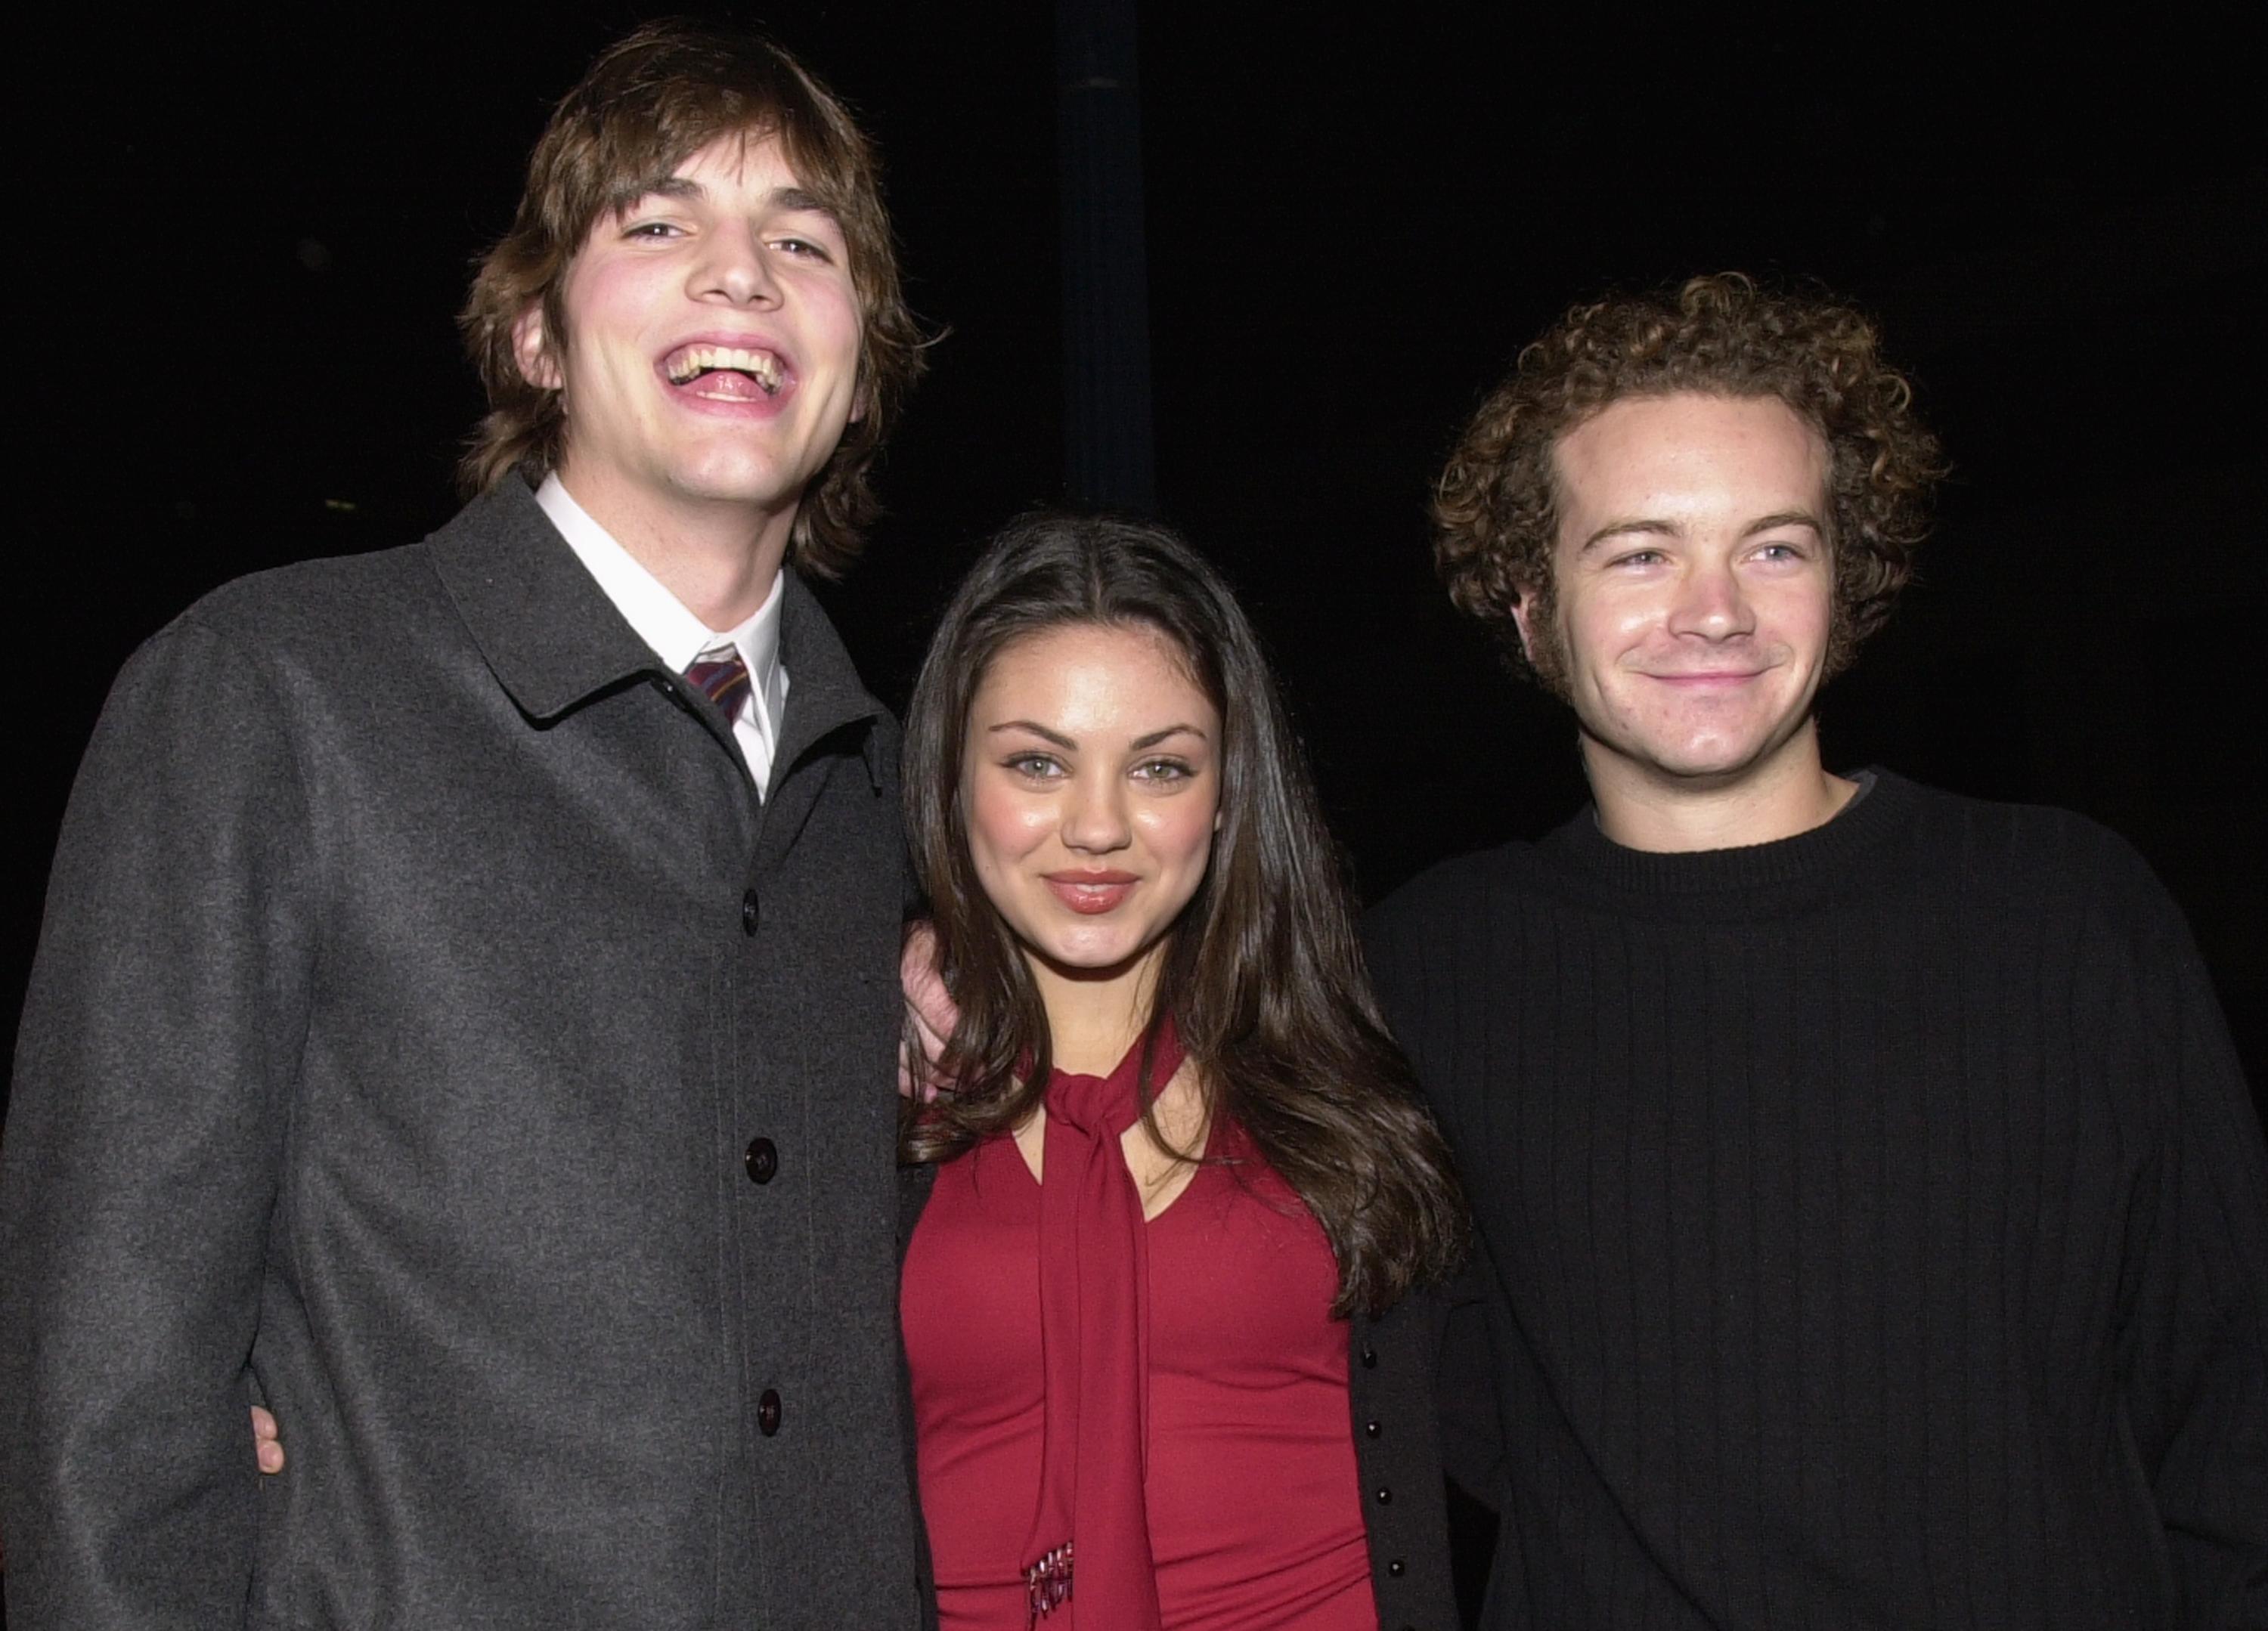 Ashton Kutcher, Mila Kunis, and Danny Masterson at the premiere of USA Films' "Traffic" on December 14, 2000 in Beverly Hills | Source: Getty Images